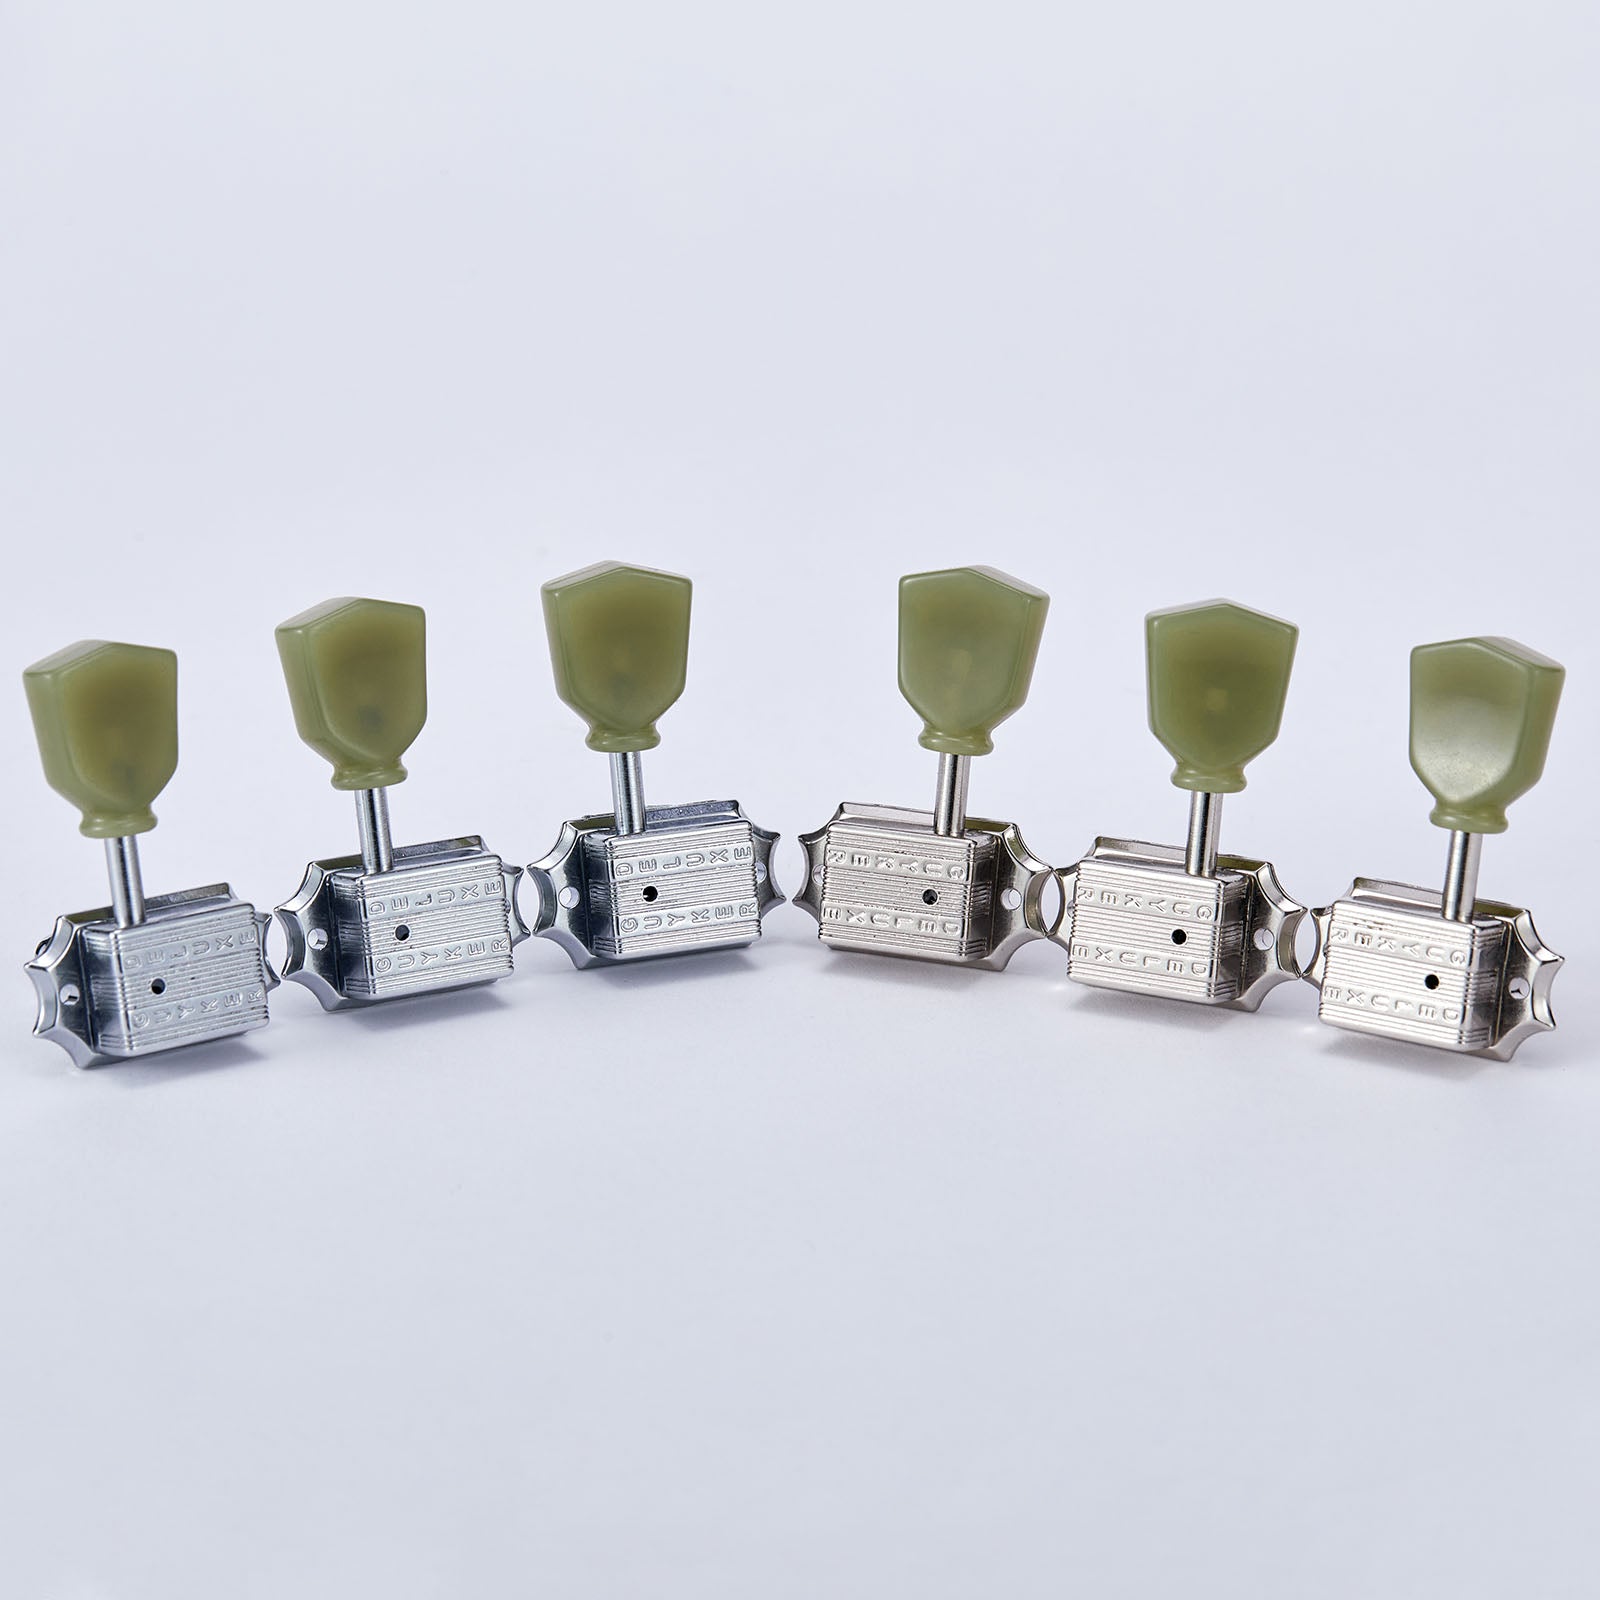 3R/3L Vintage Style Guitar Tuning Pegs Machines